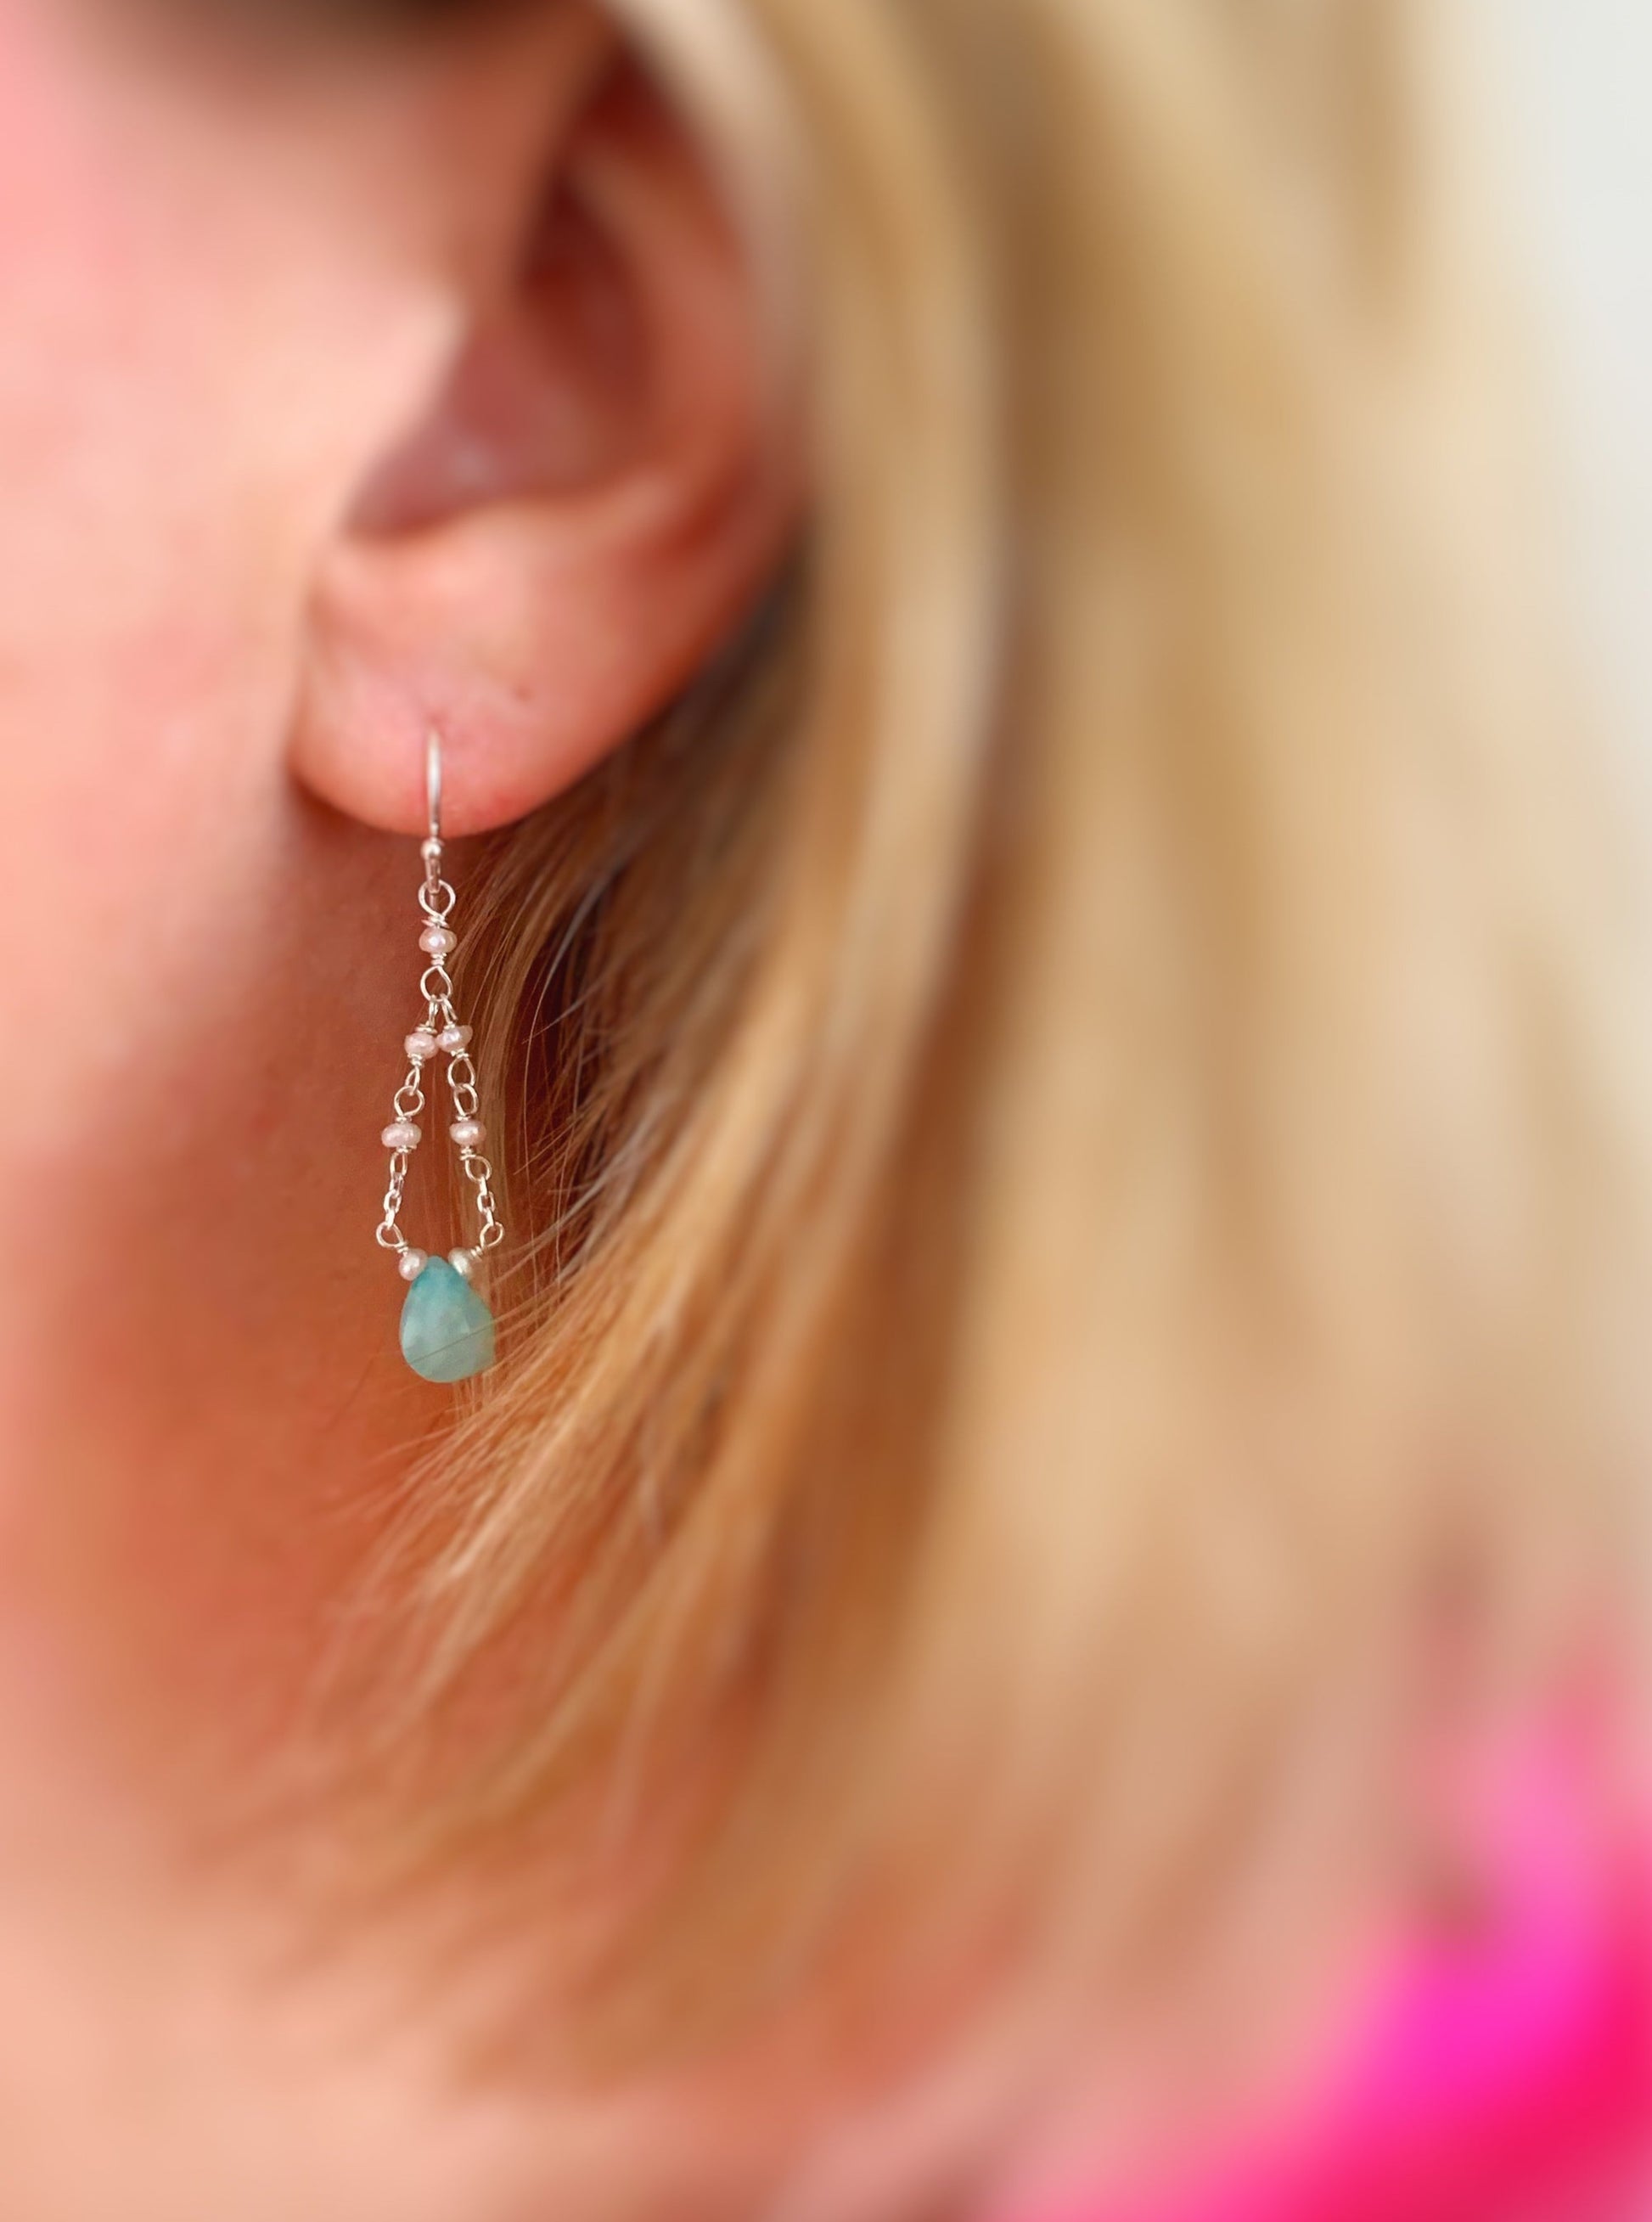 The island air earring by mermaids and madeleines in sterling silver has a amazonite teardrop at the center of the drop earring and then chain with freshwater pearls that loops to the top. this is a photo of a person wearing the earring with a close up view